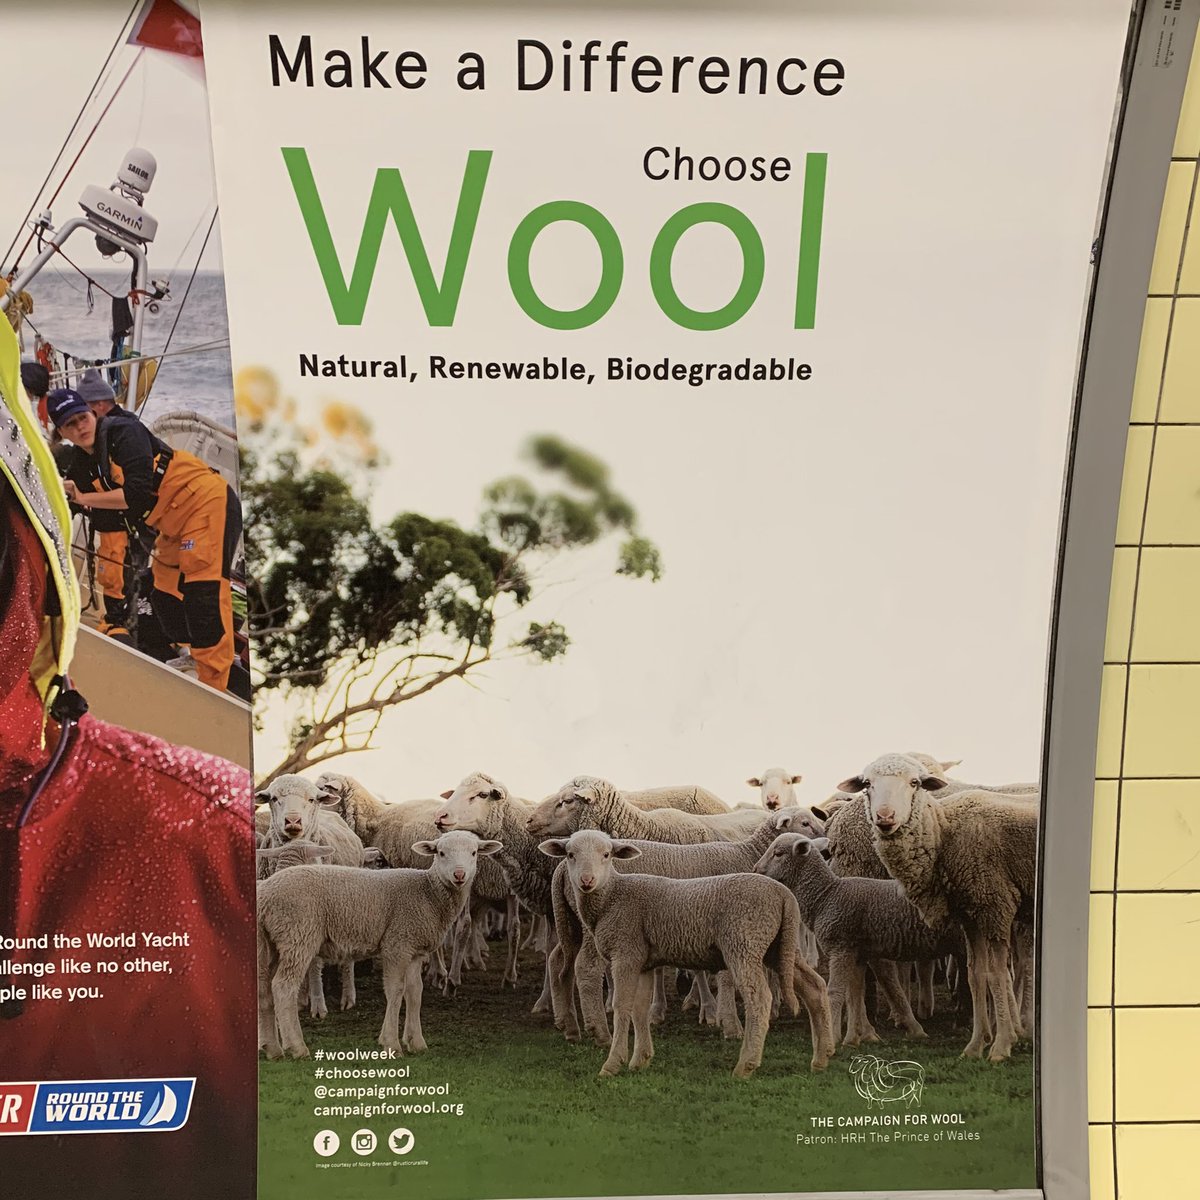 As if by magic, what do I see on Tube? #woolweek #choosewool Hear hear! Marching about in London is a plastic anorak is now my pet hate. I need a wool one. Maybe it’s called a jumper. 😳